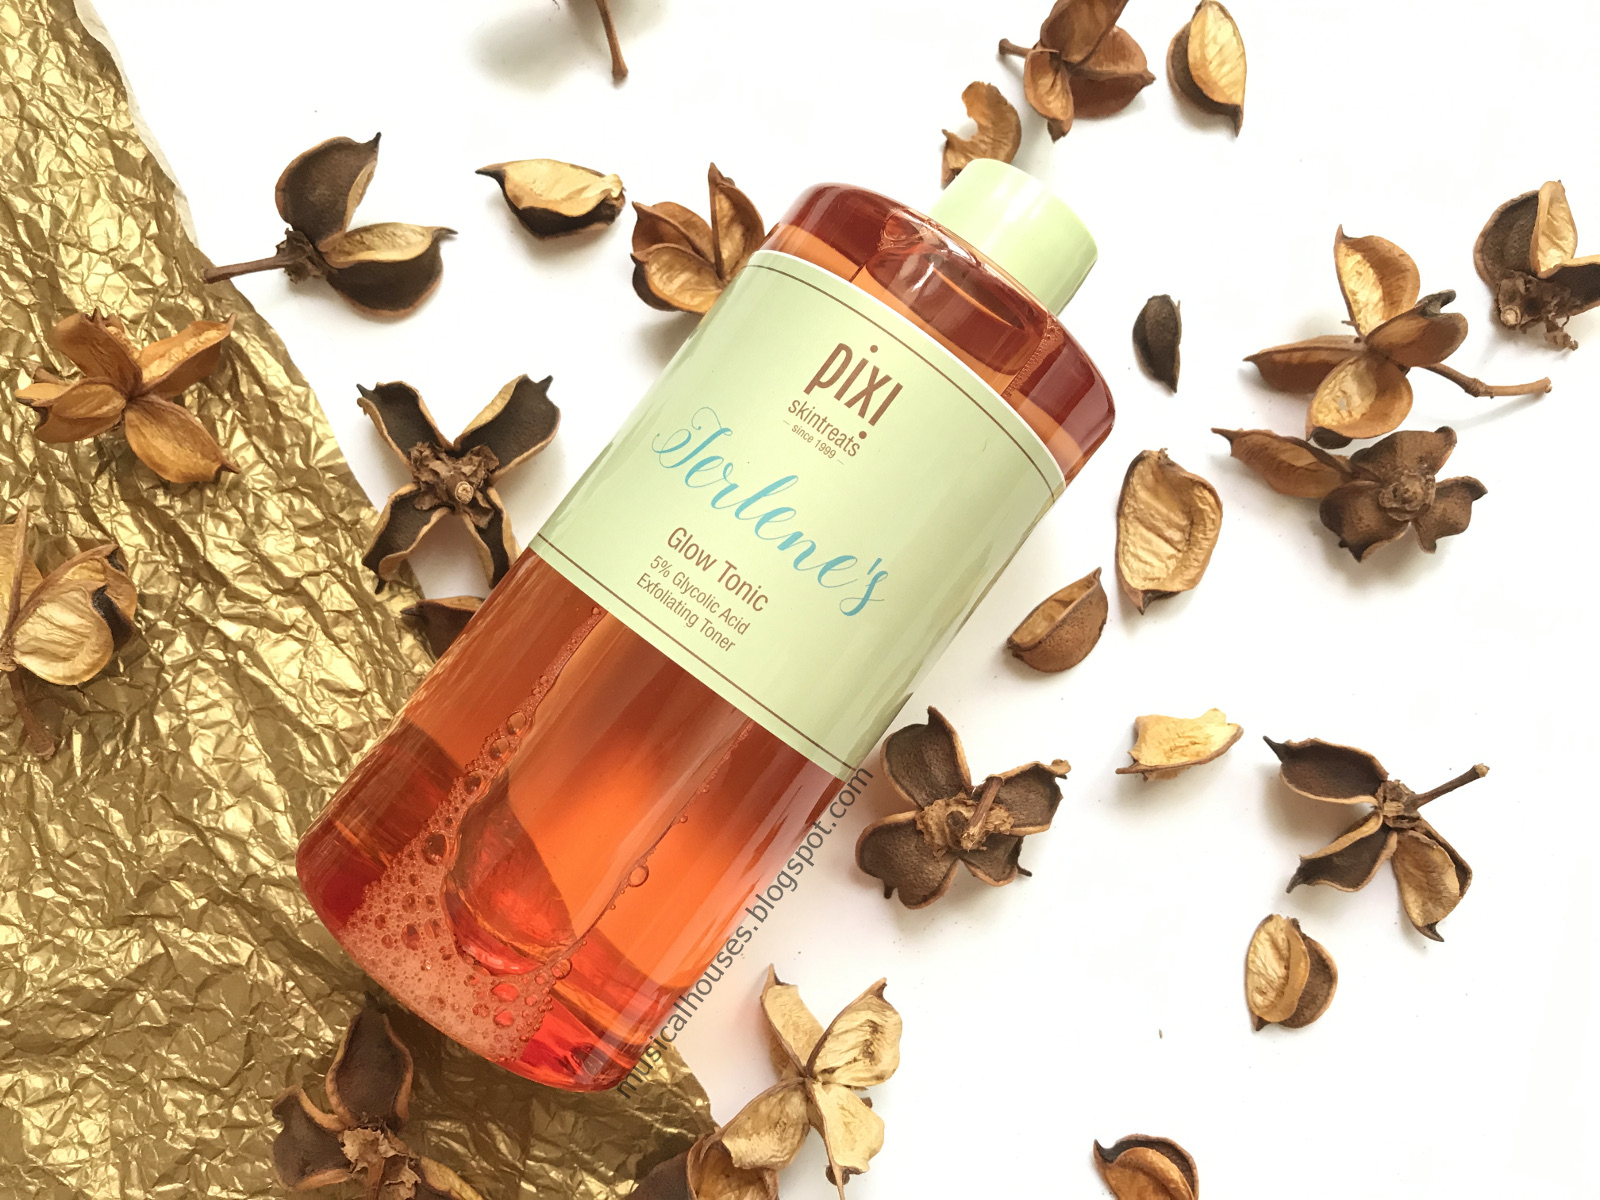 Pixi Beauty Glow Tonic Review Ingredients of Faces and Fingers